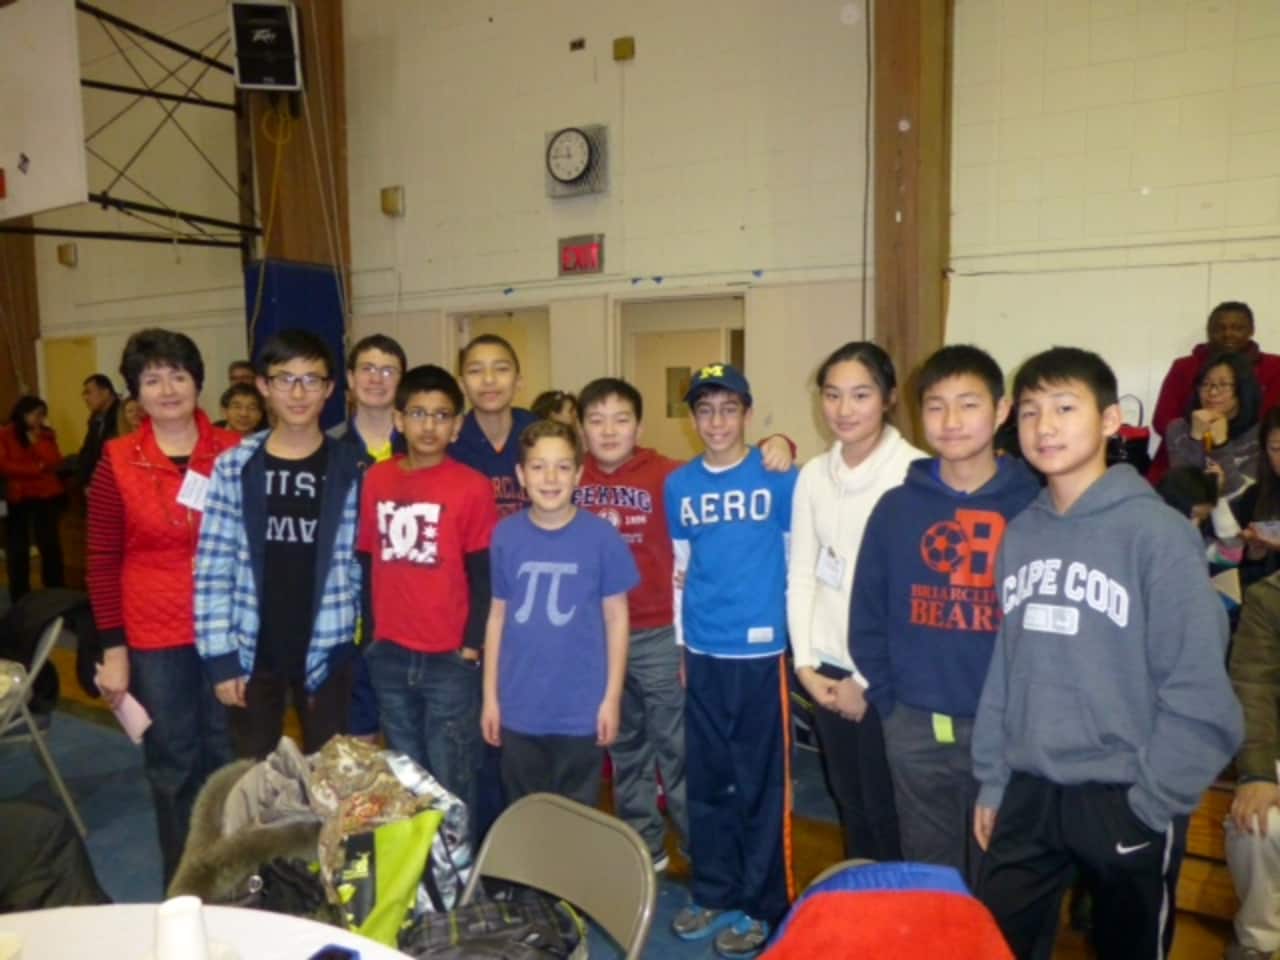 Briarcliff Middle Schools MATHCOUNTS team placed fourth in a competition with teams from Westchester and Putnam counties.